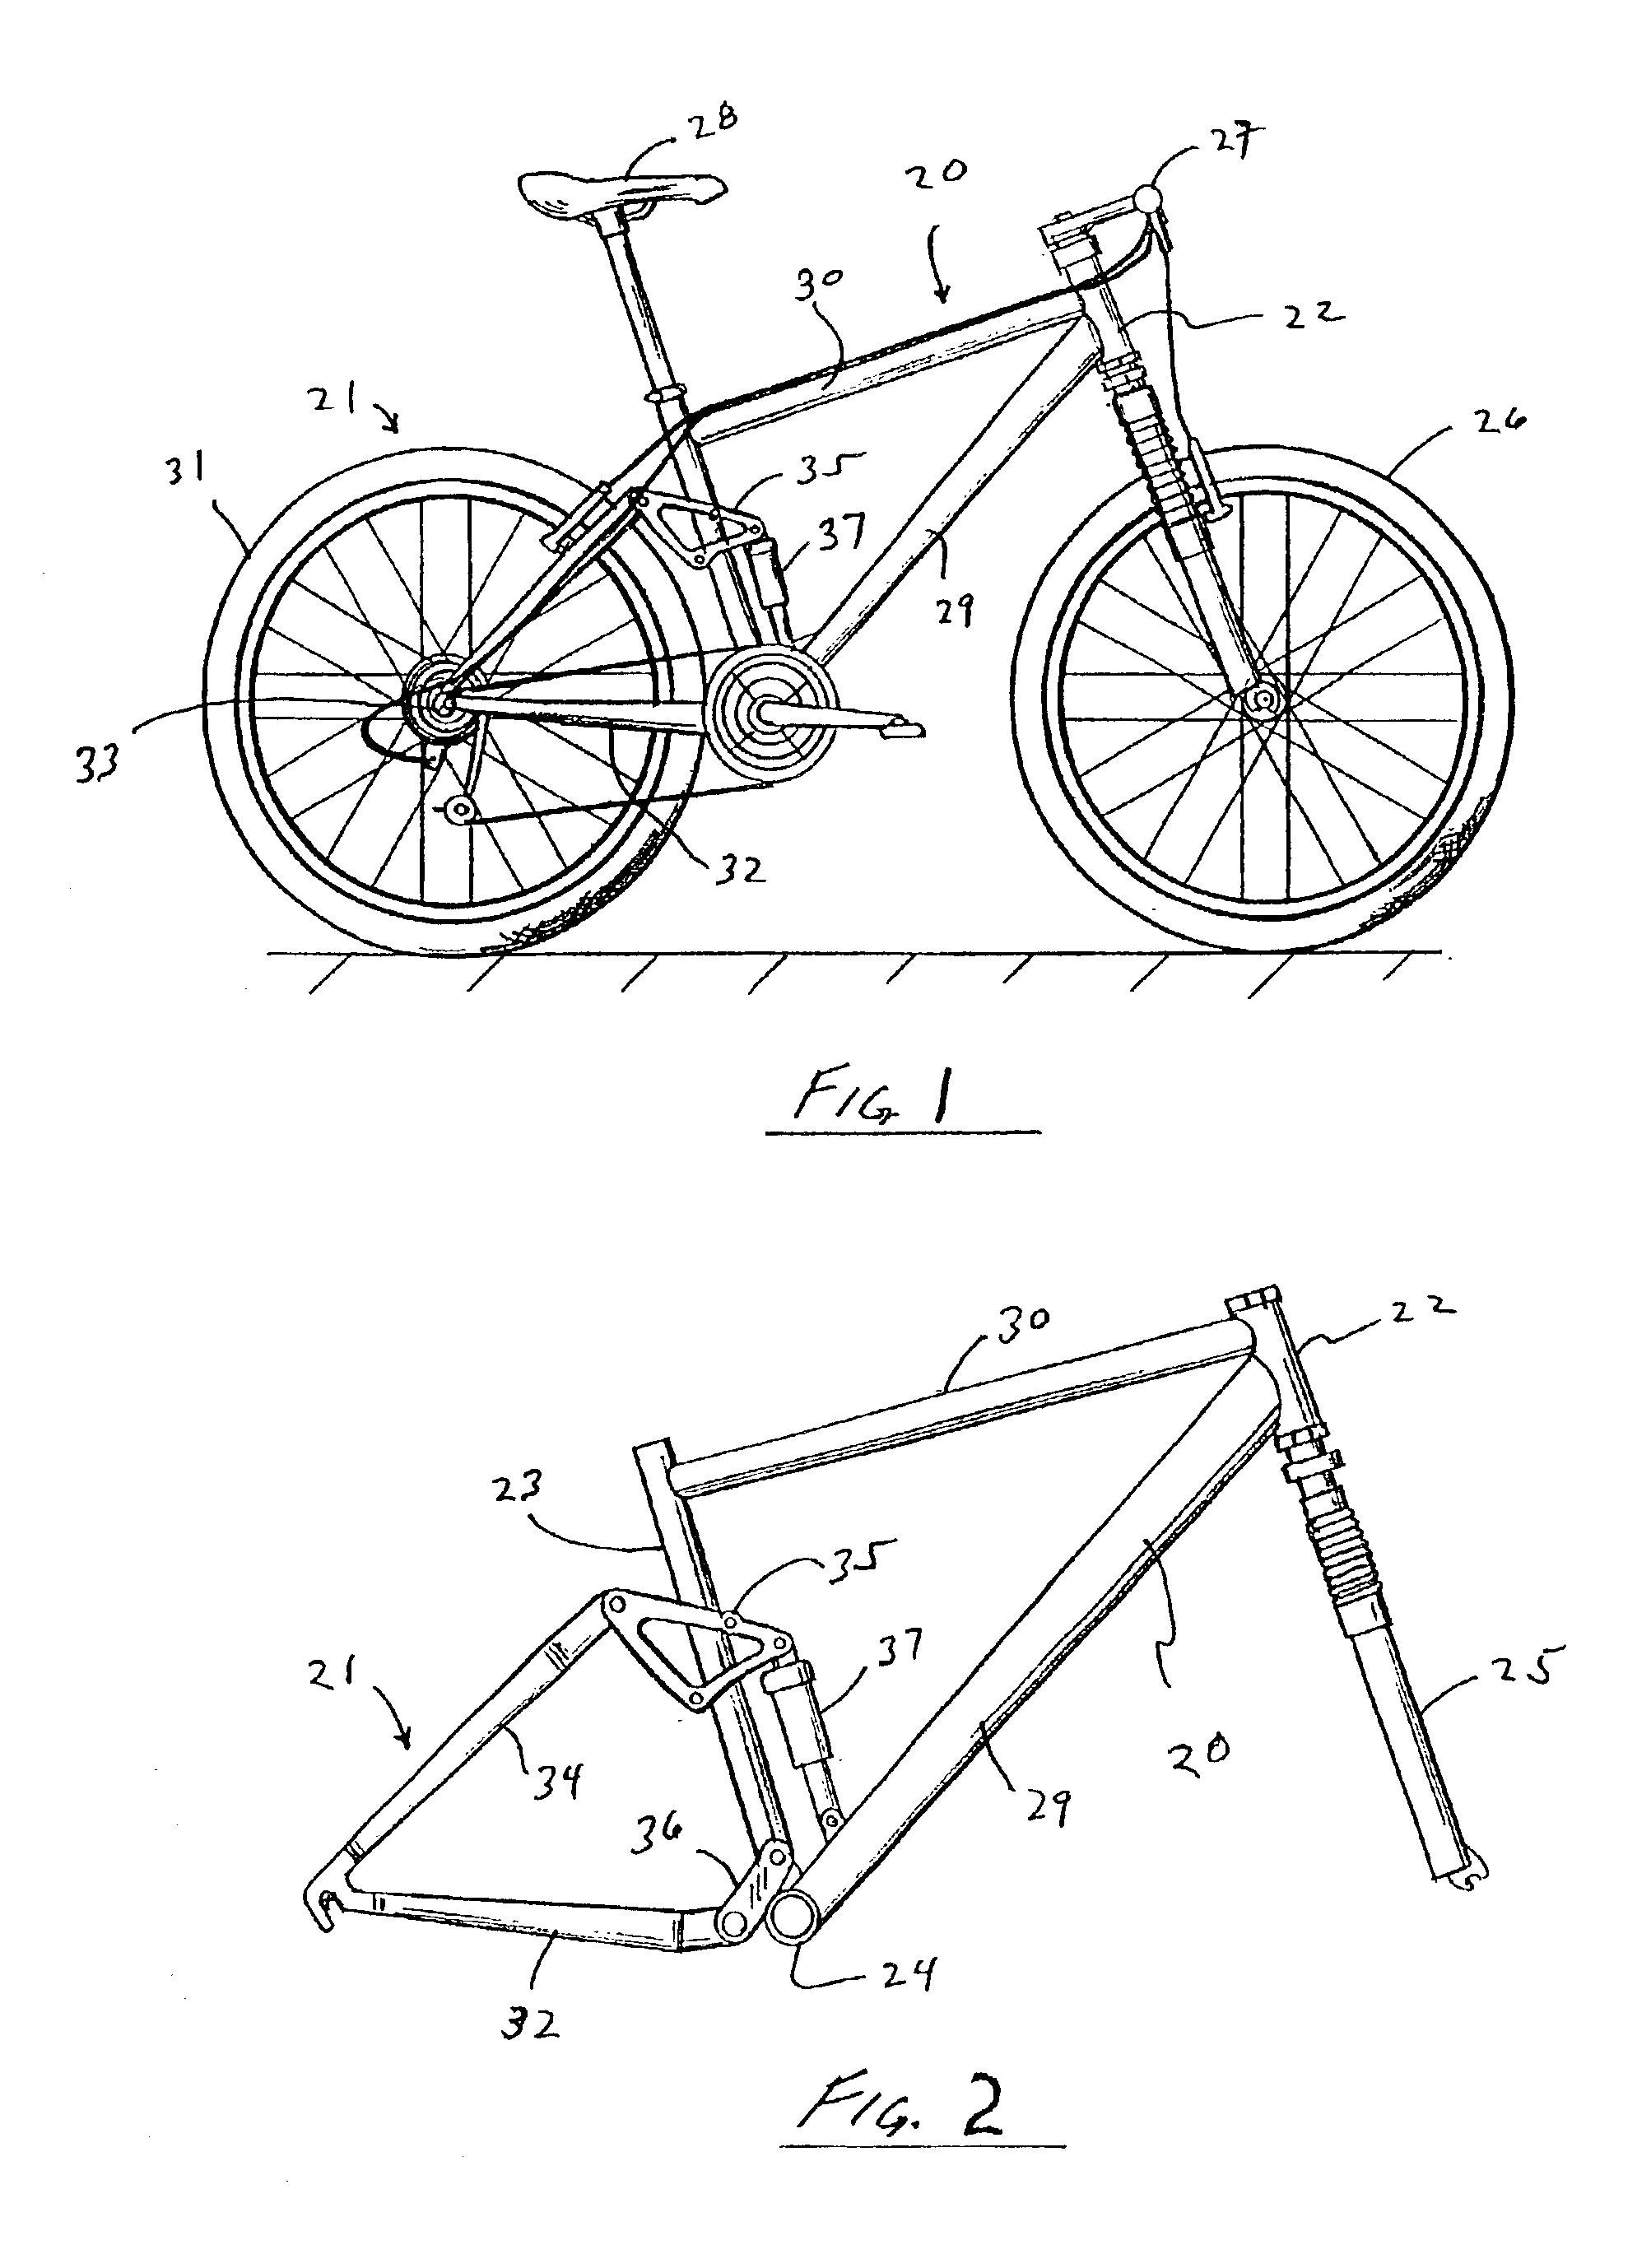 Complex-shaped carbon fiber structural member and its method of manufacture